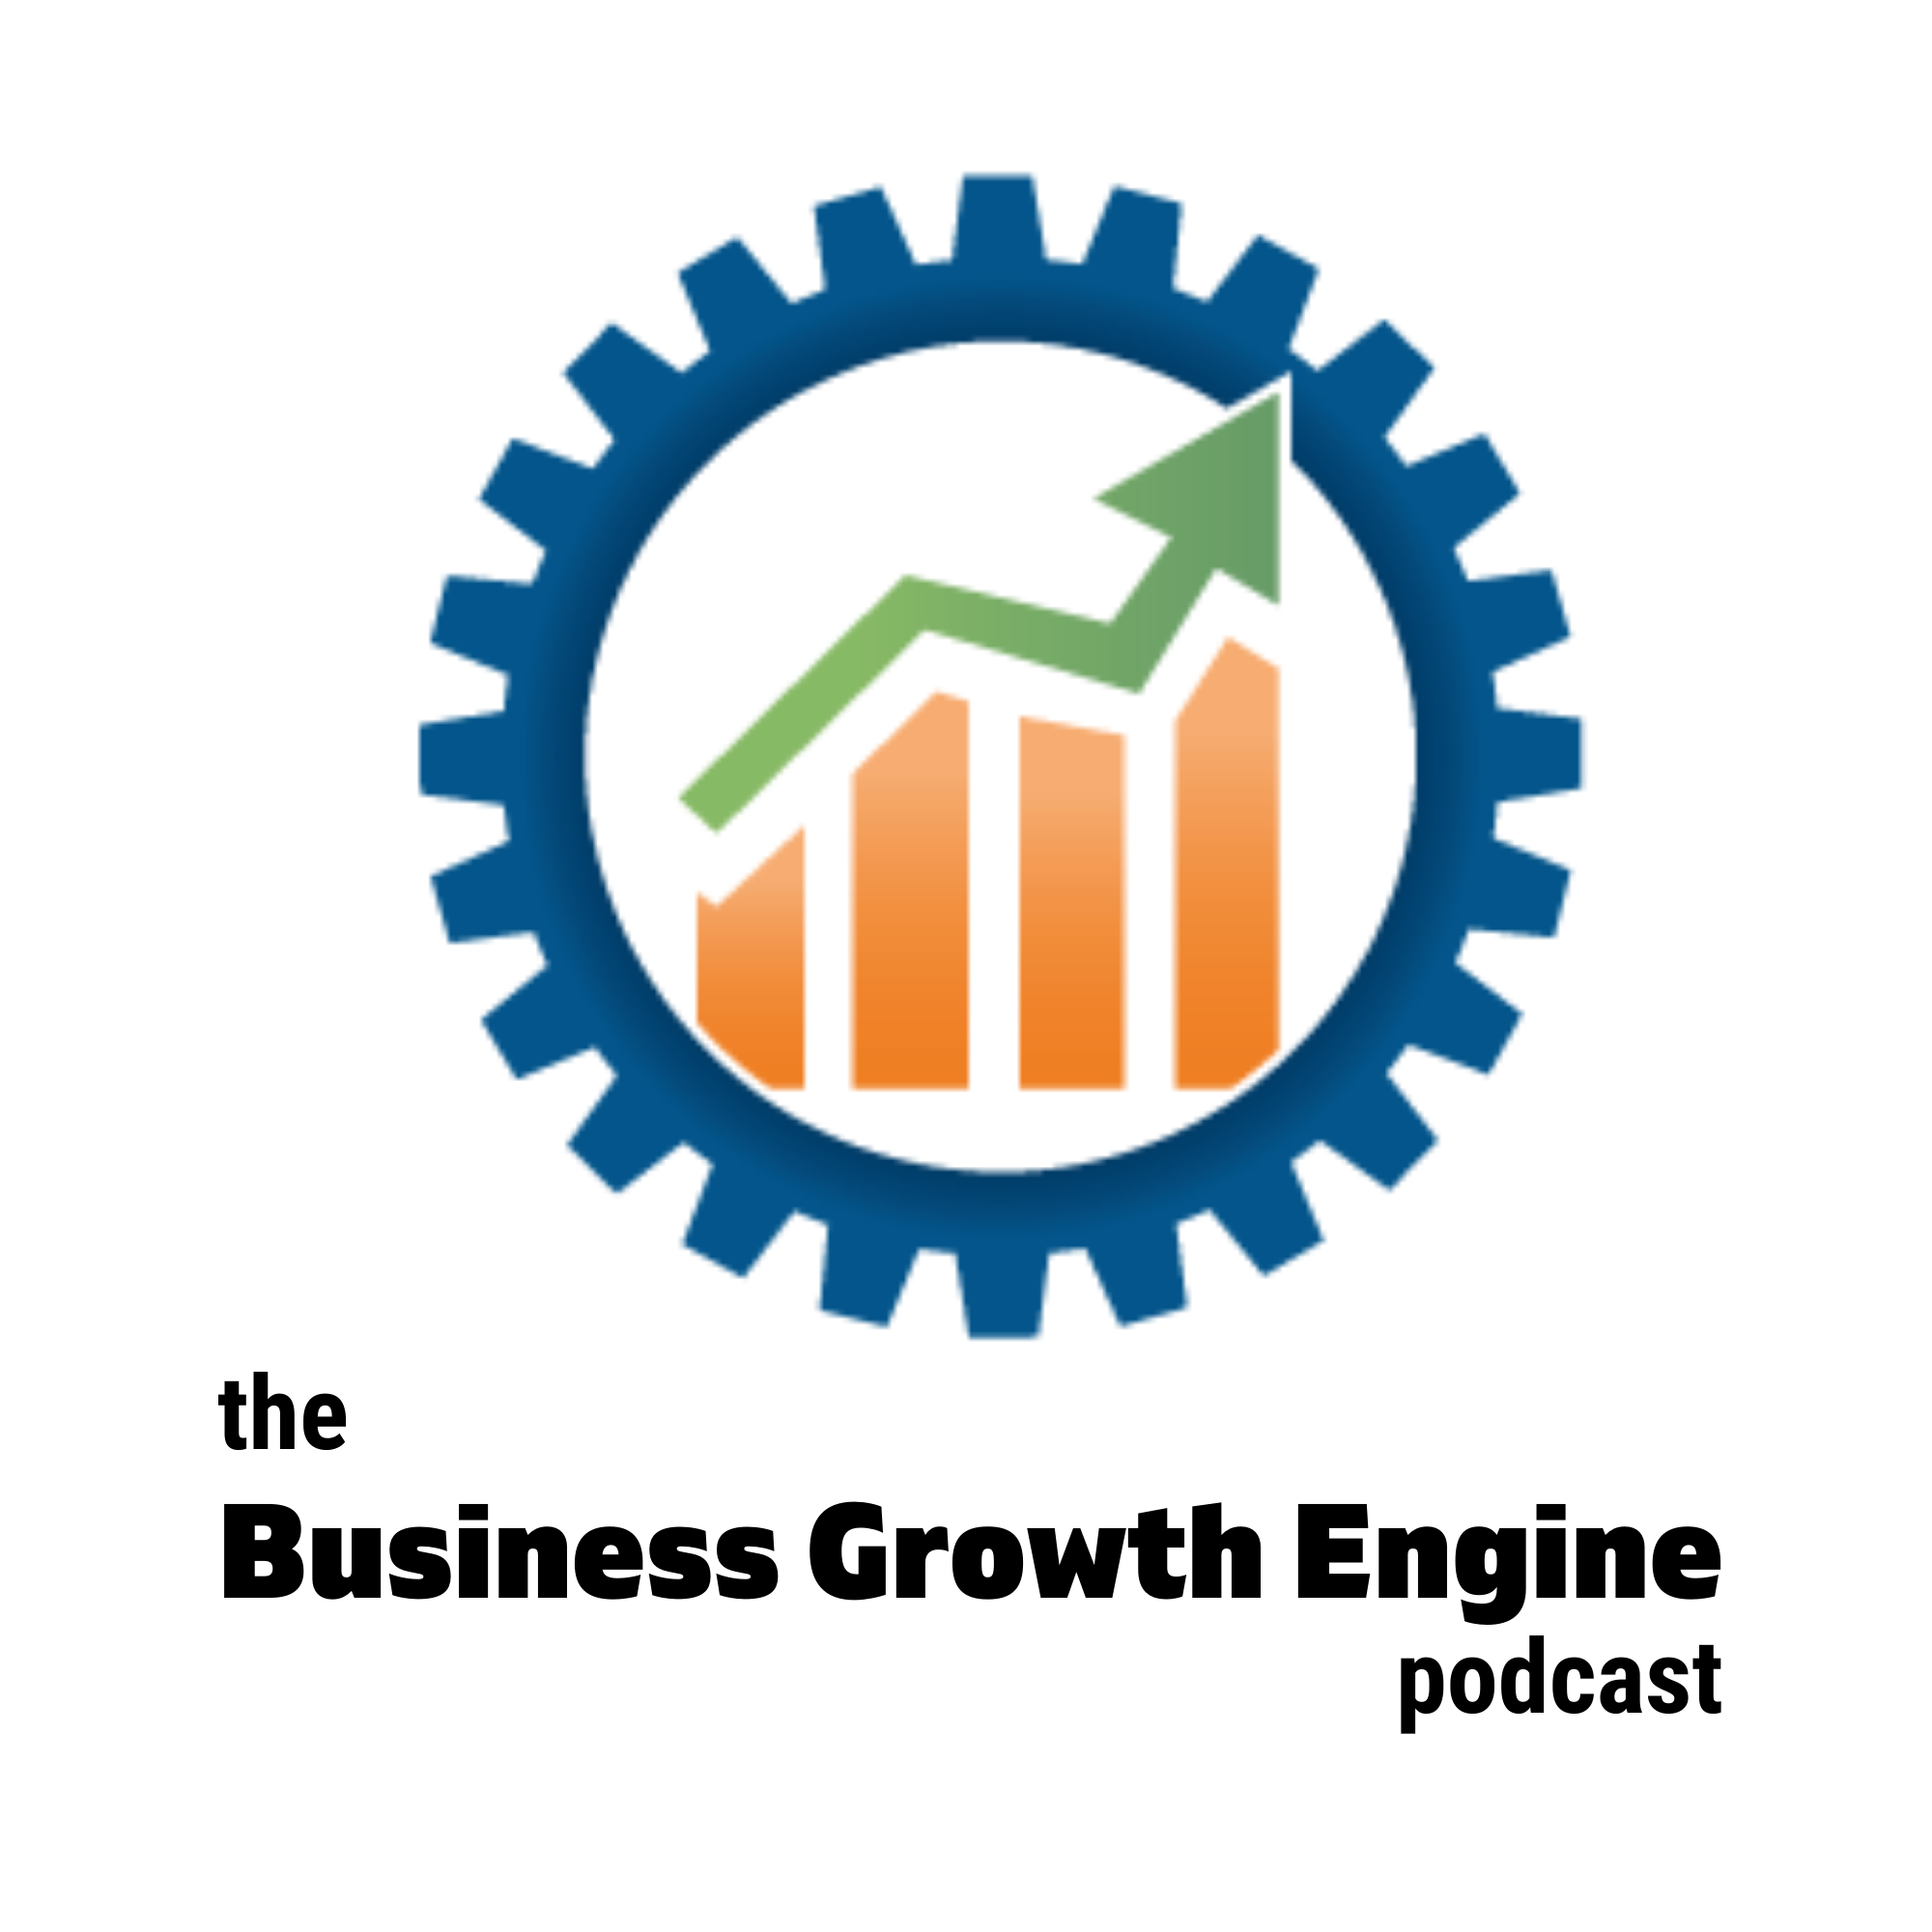 The Business Growth Engine Podcast